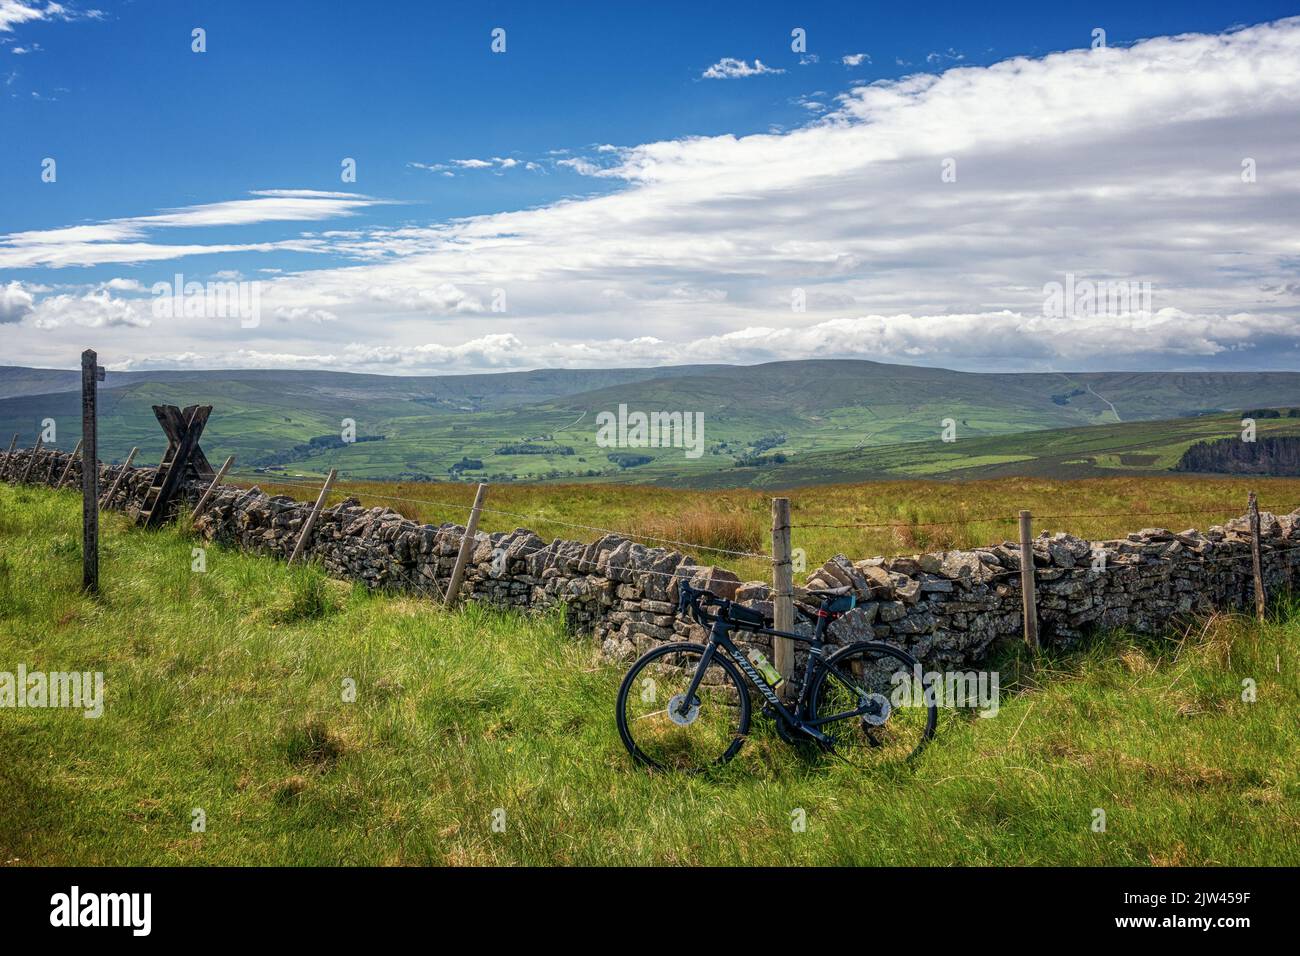 Views looking into the Weardale Valley and across to Cross Fell from the top of Peat Hill cycling climb with a road bike leaning against an old stone Stock Photo